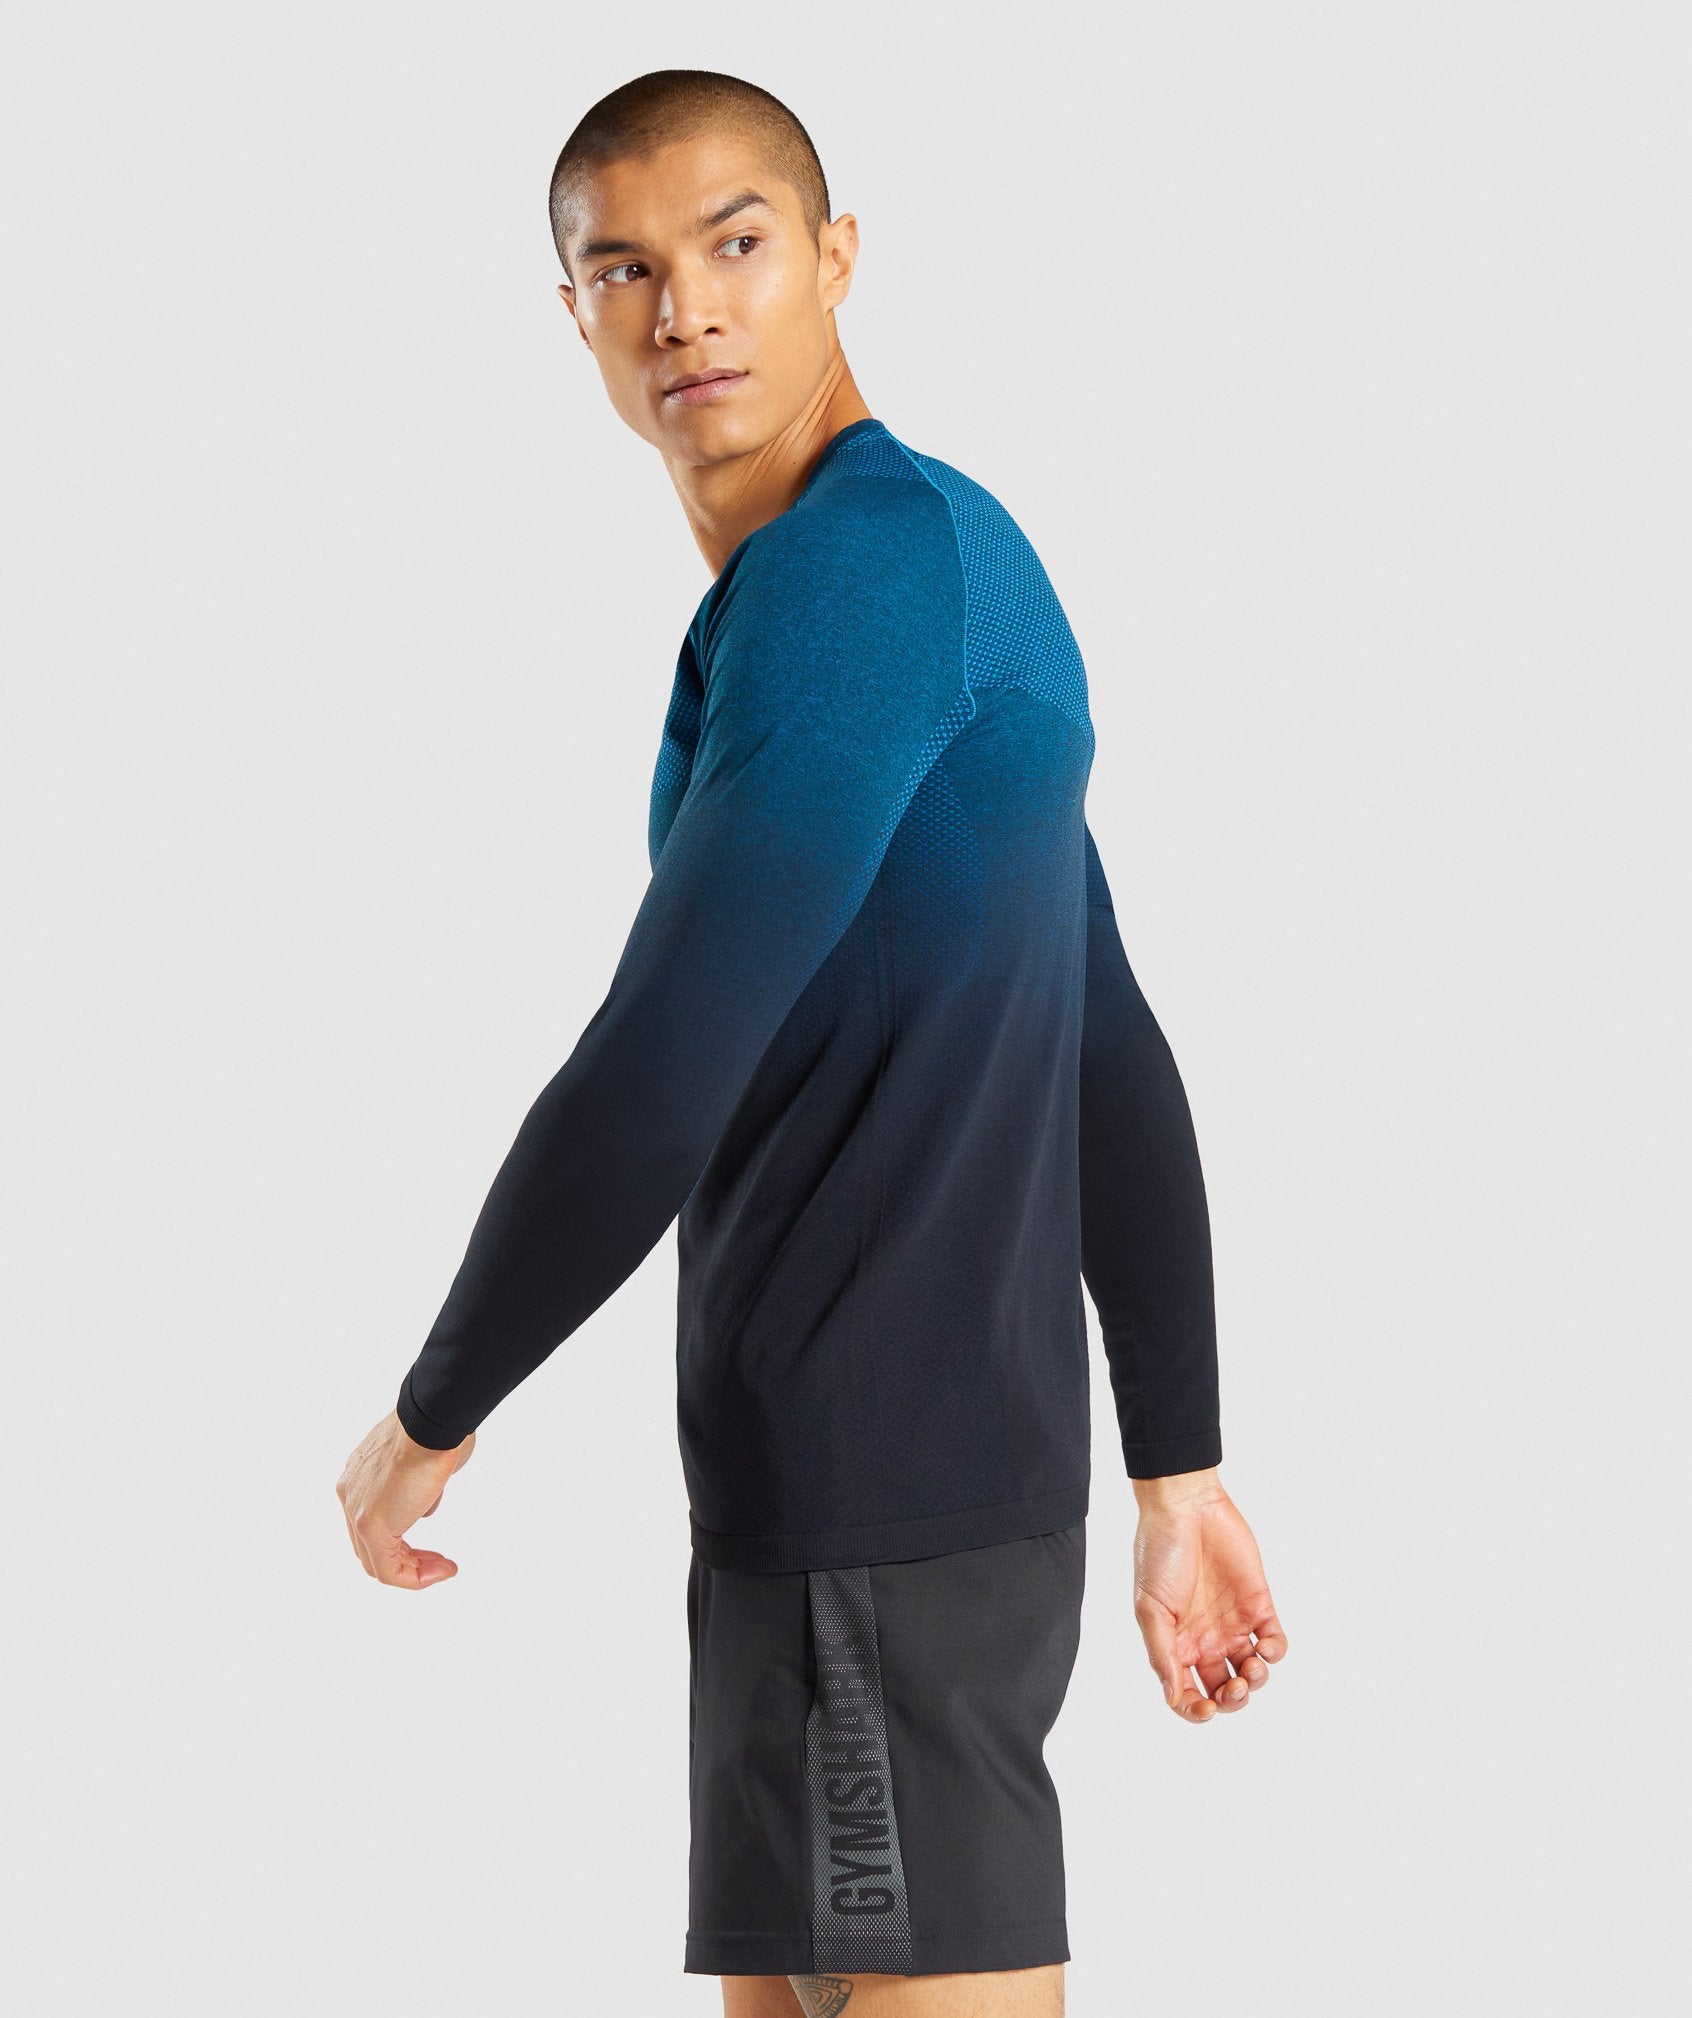 Vital Ombre Seamless Long Sleeve T-Shirt in Teal Marl/Black